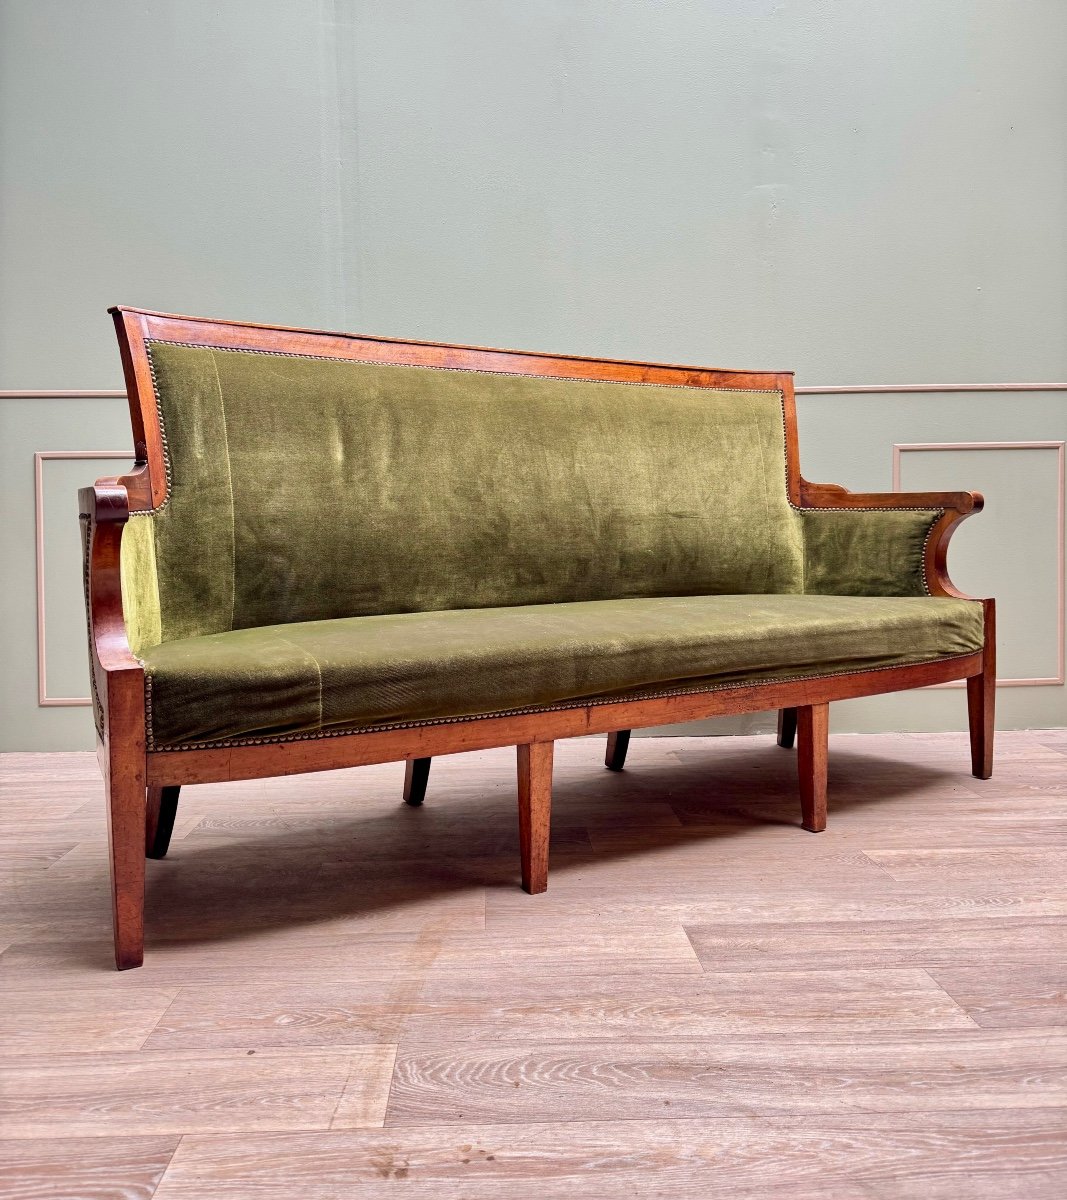 Large Officer's Sofa In Natural Wood From The Restoration Period 19th Century -photo-2